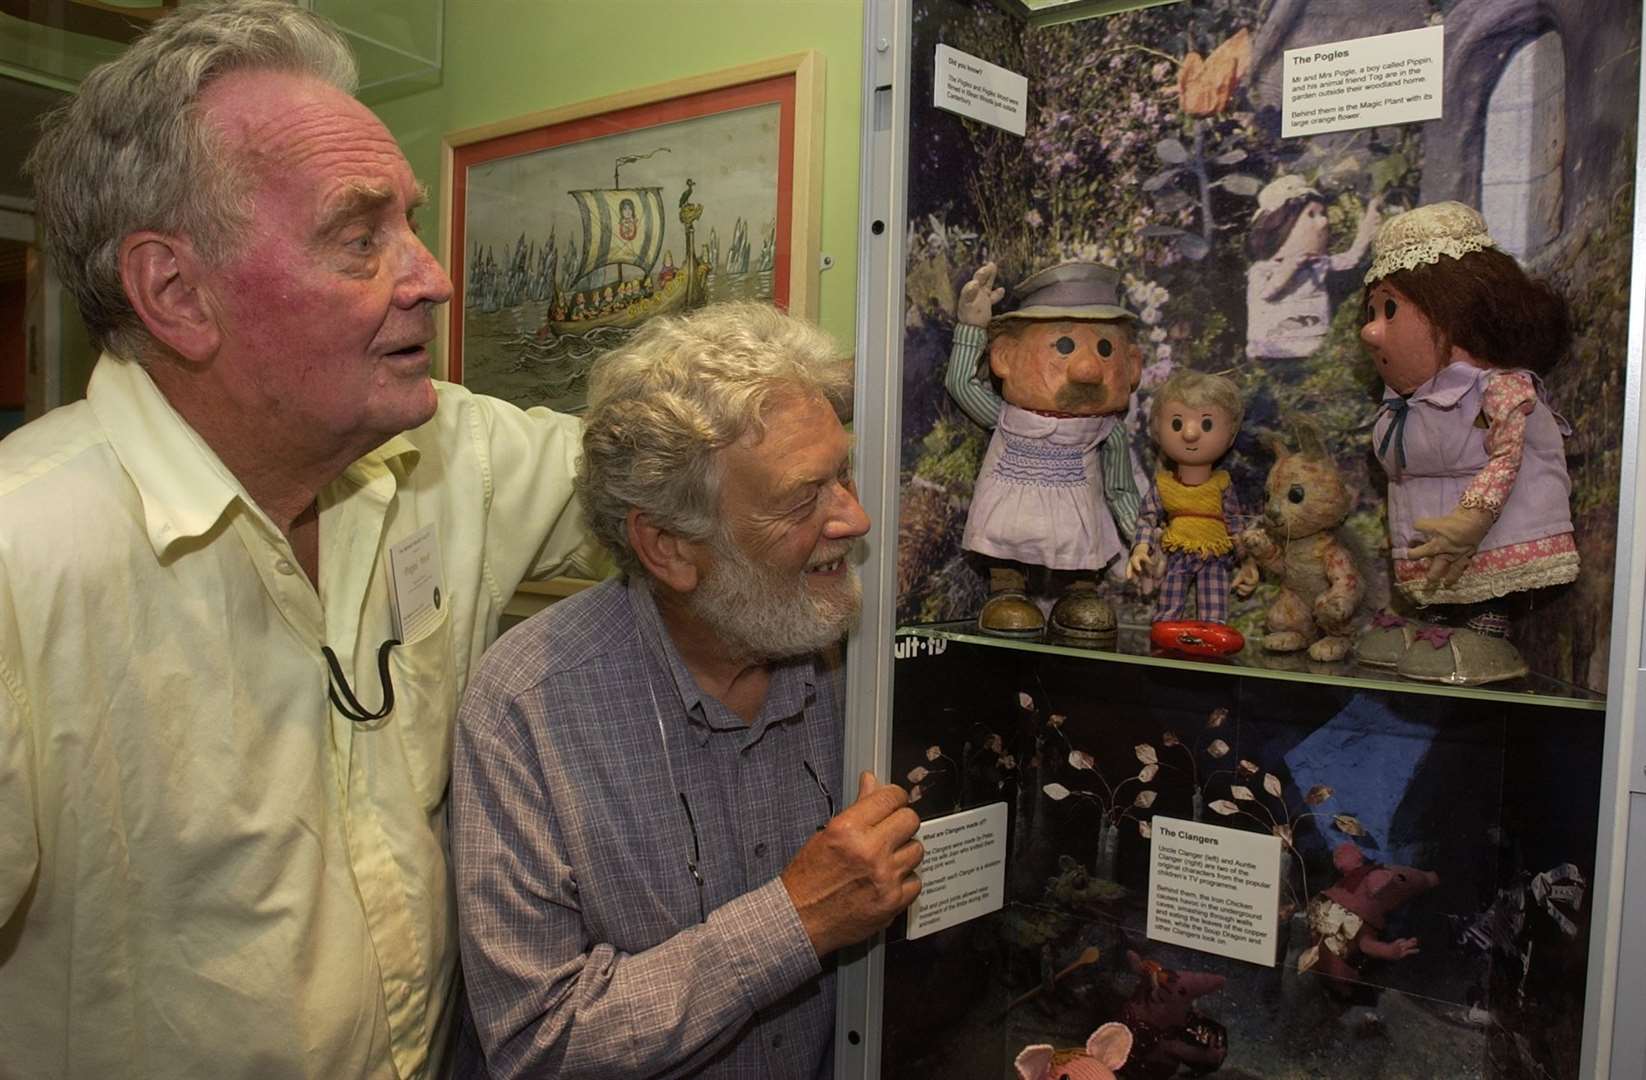 Oliver Postgate and Peter Firmin admire the Bagpuss and Friends display at the Museum of Canterbury which has since closed